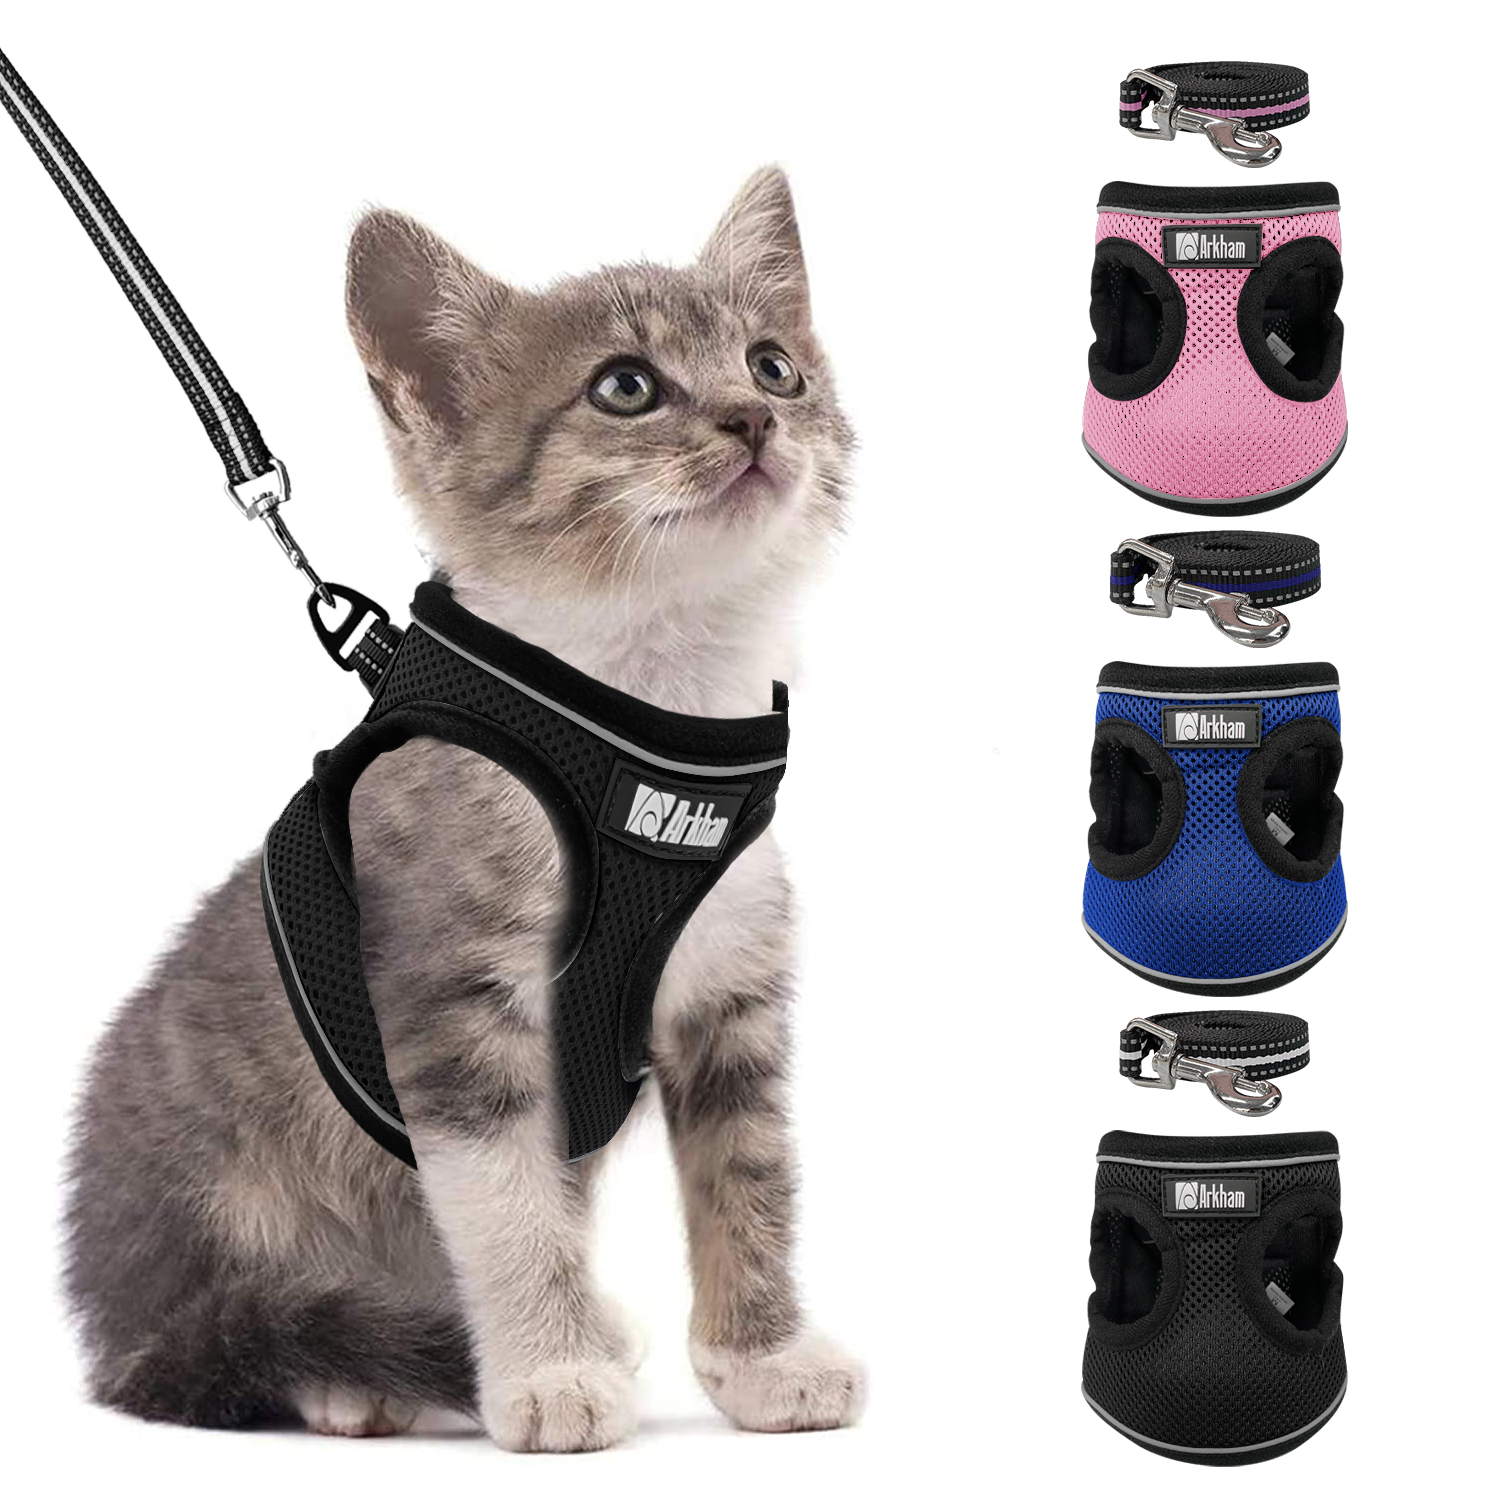 Howarmer Black Cat Harness and Leash, Escape Proof Adjustable Cat Vest  Harnesses for Walking, Soft Harness for Puppy Small Medium Large Cats, S 